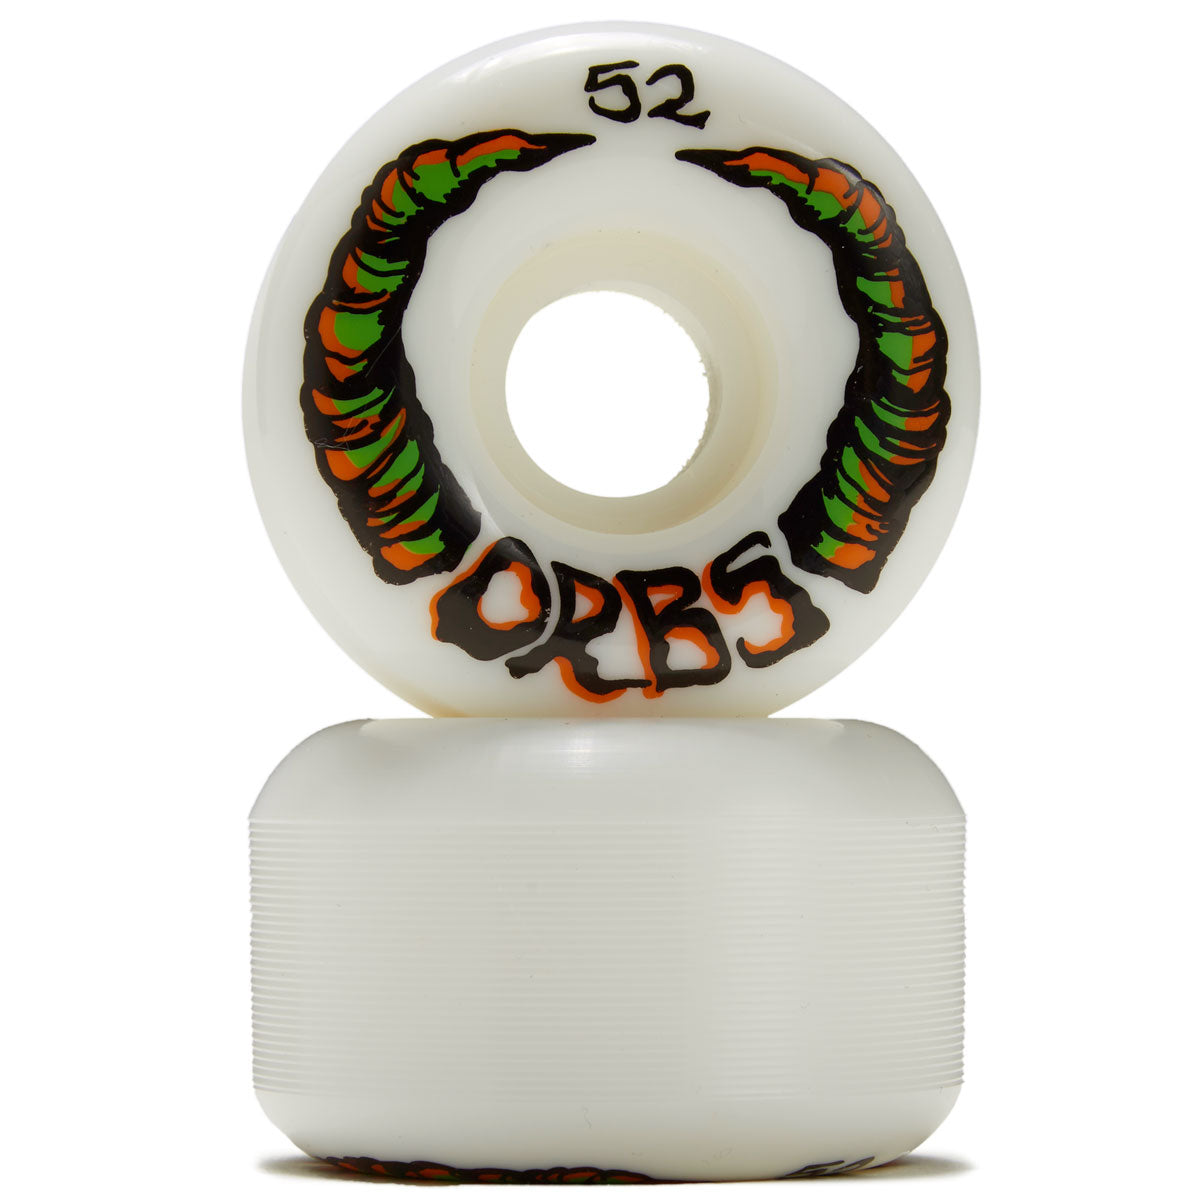 Welcome Orbs Apparitions Round 99A Skateboard Wheels - White - 52mm image 2